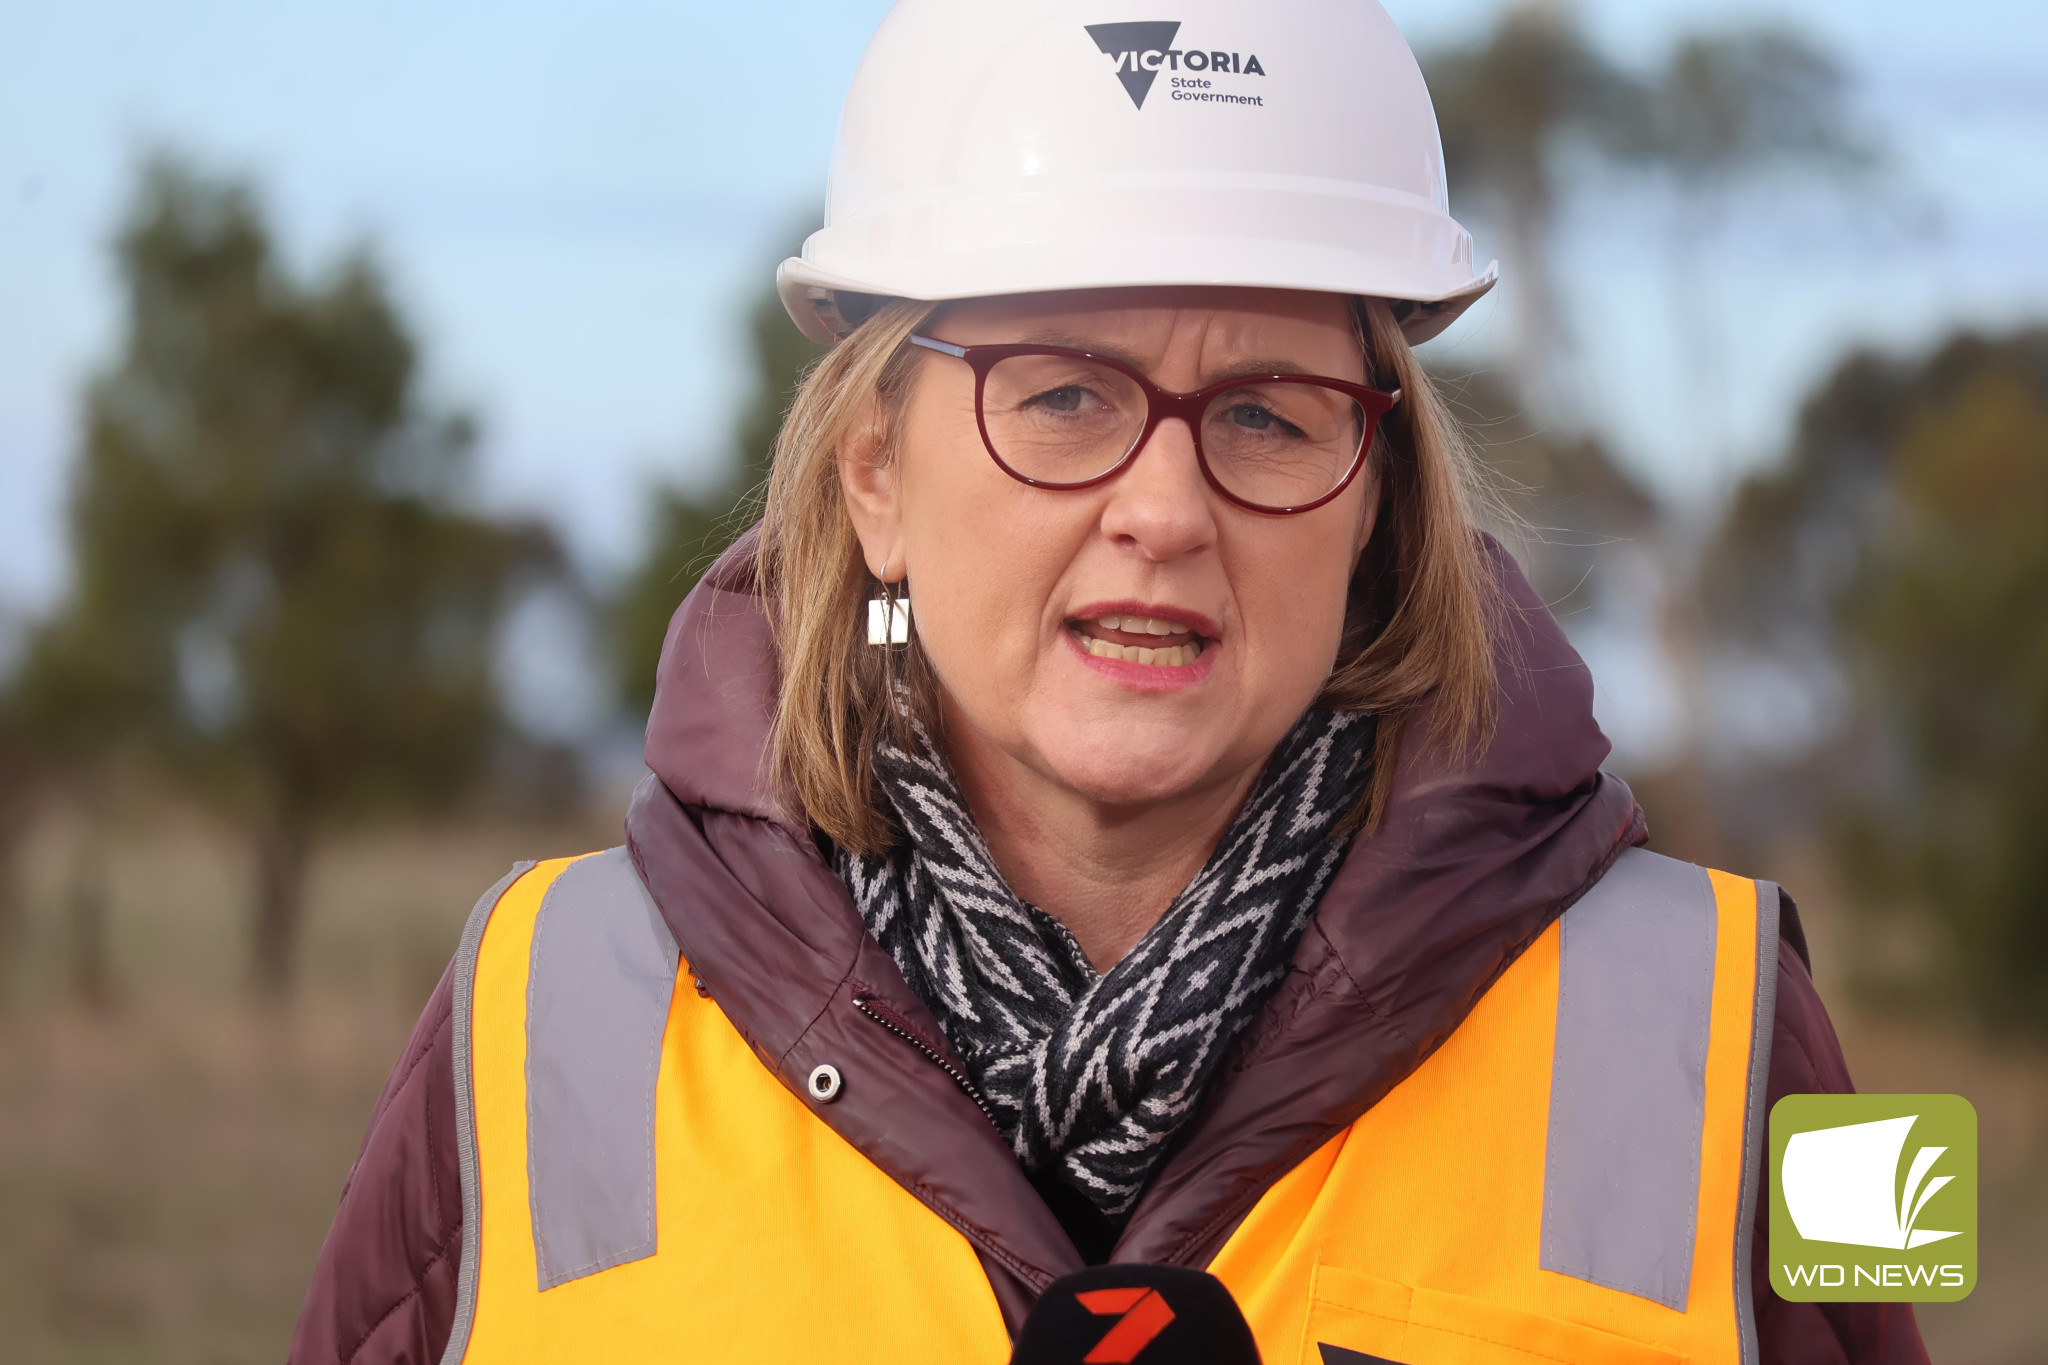 Project approved: Premier Jacinta Allan announced Beach Energy Limited had been given approval for a new offshore gas field near Port Campbell while visiting the region last week.